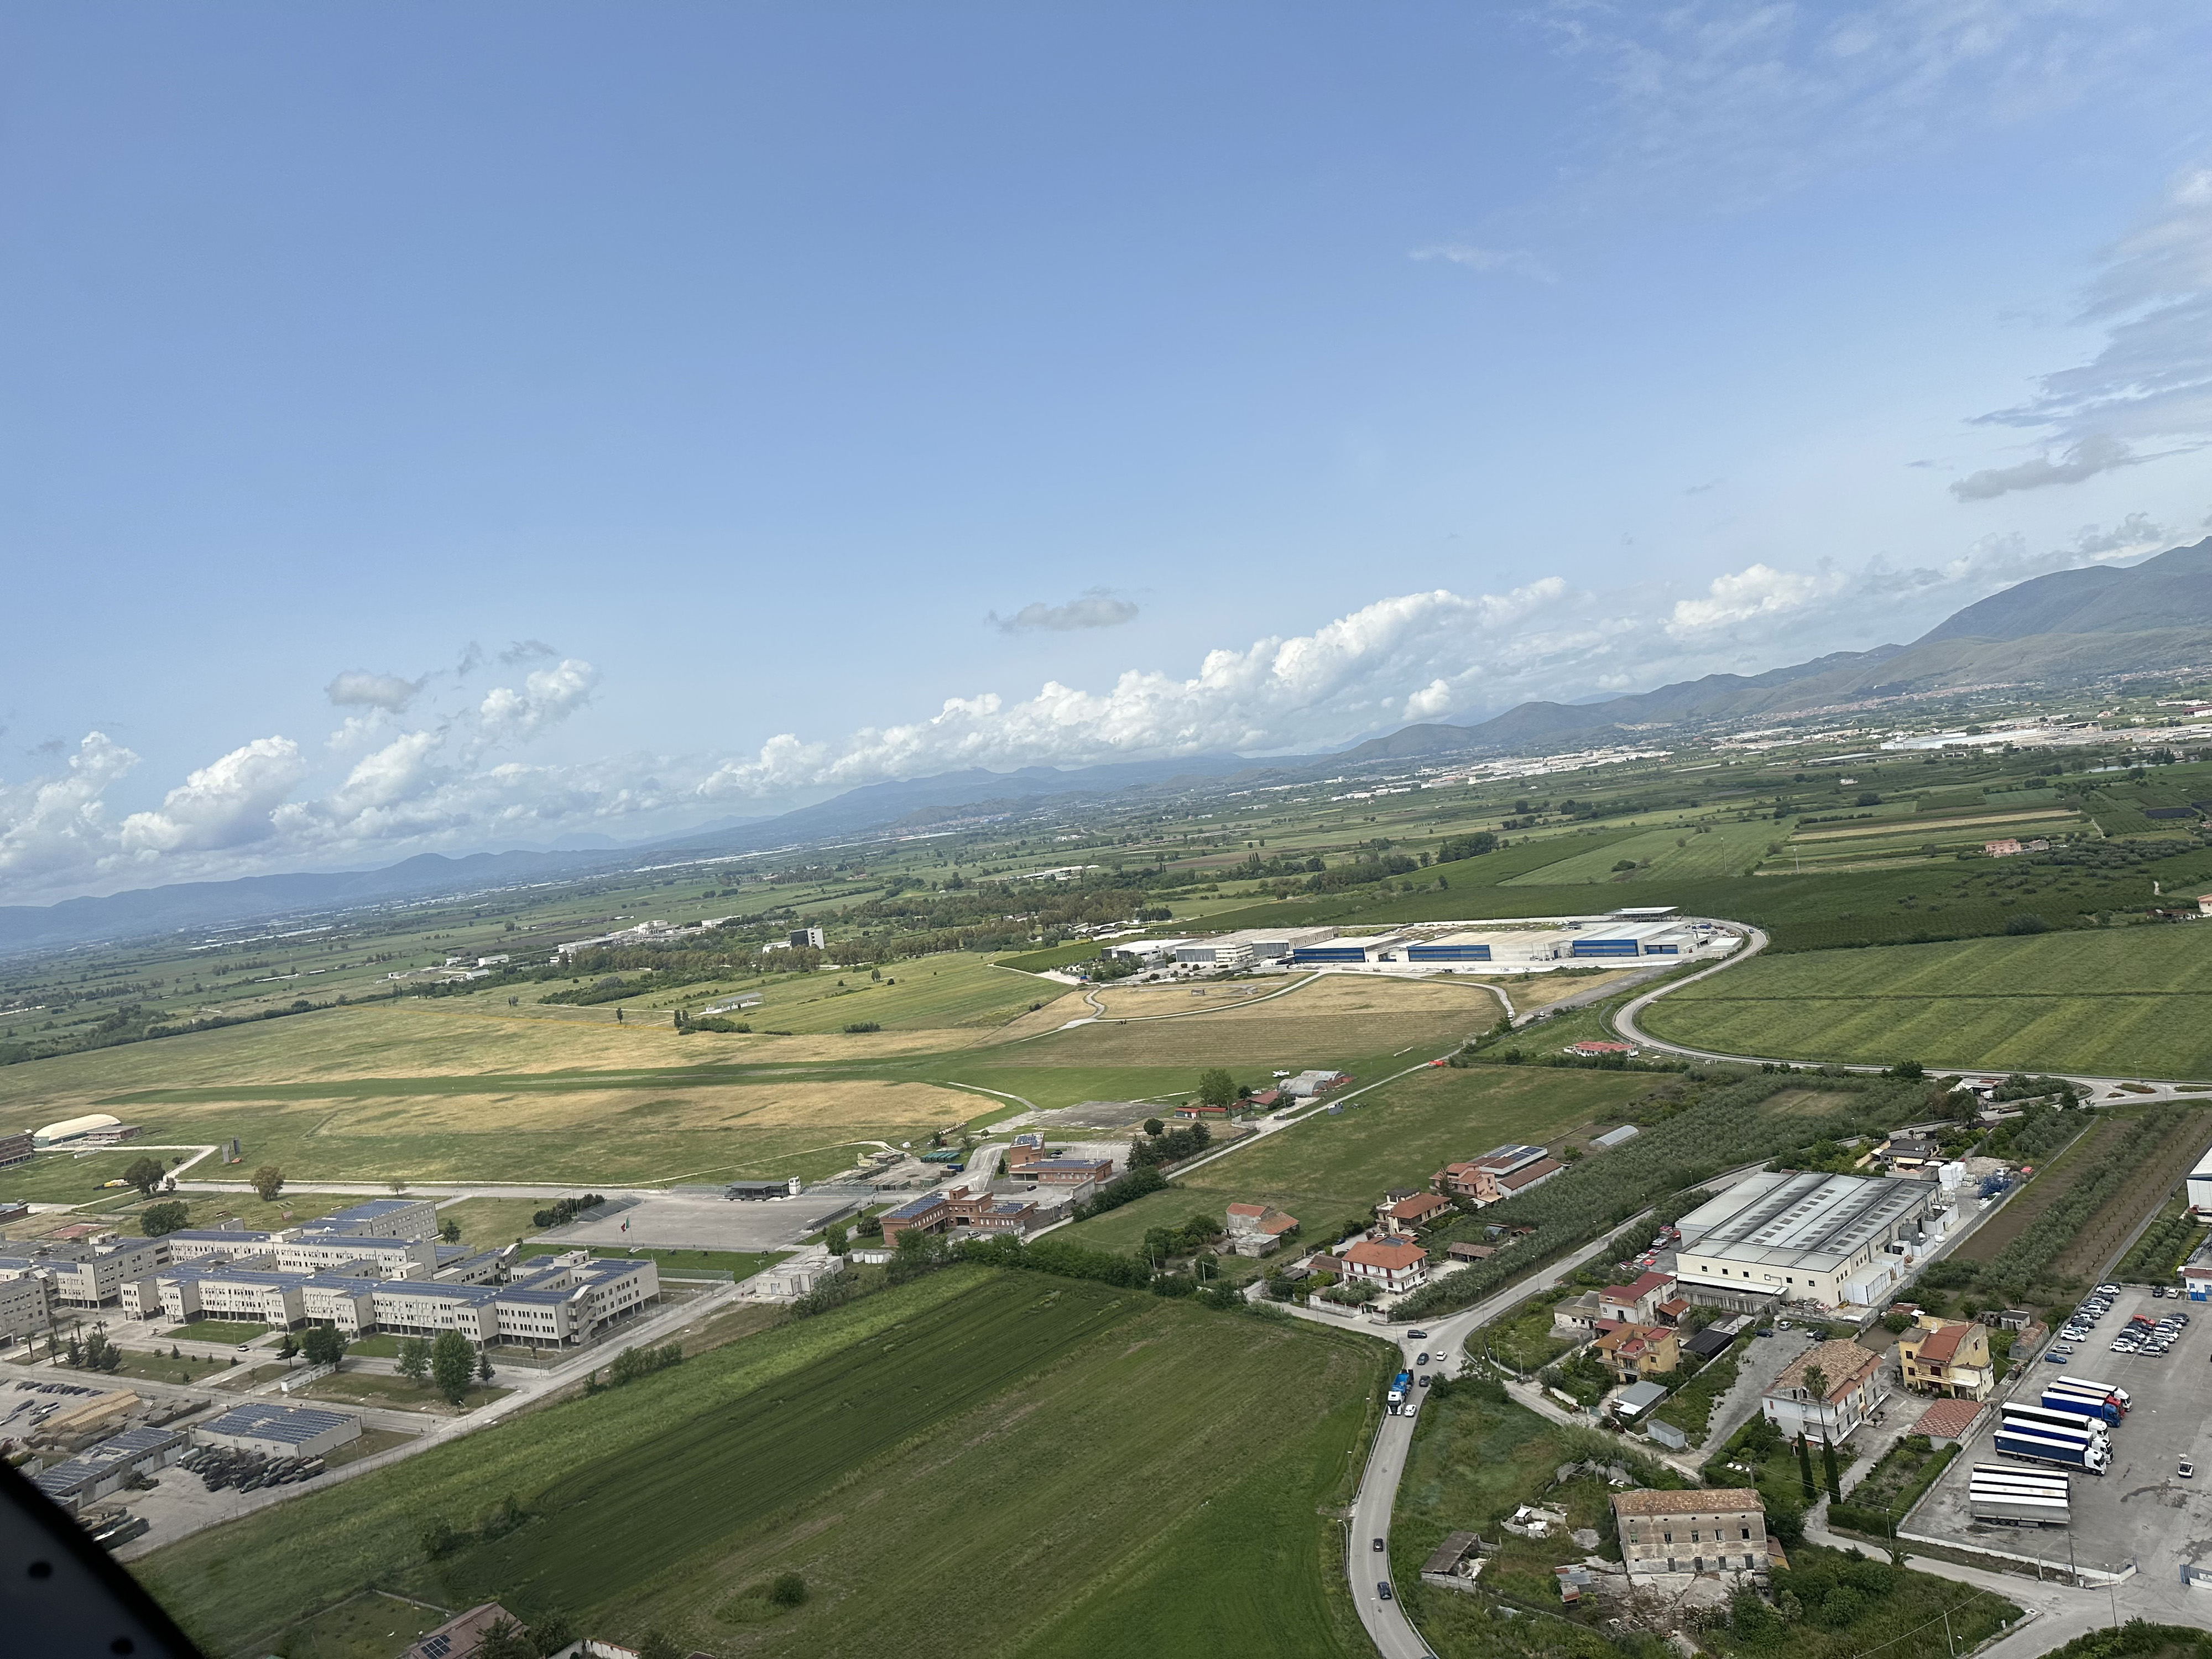 Tecnam is expanding its main facility (blue buildings) at the Capua airport, a public airport with a grass strip. Photo by Sarah Deener.